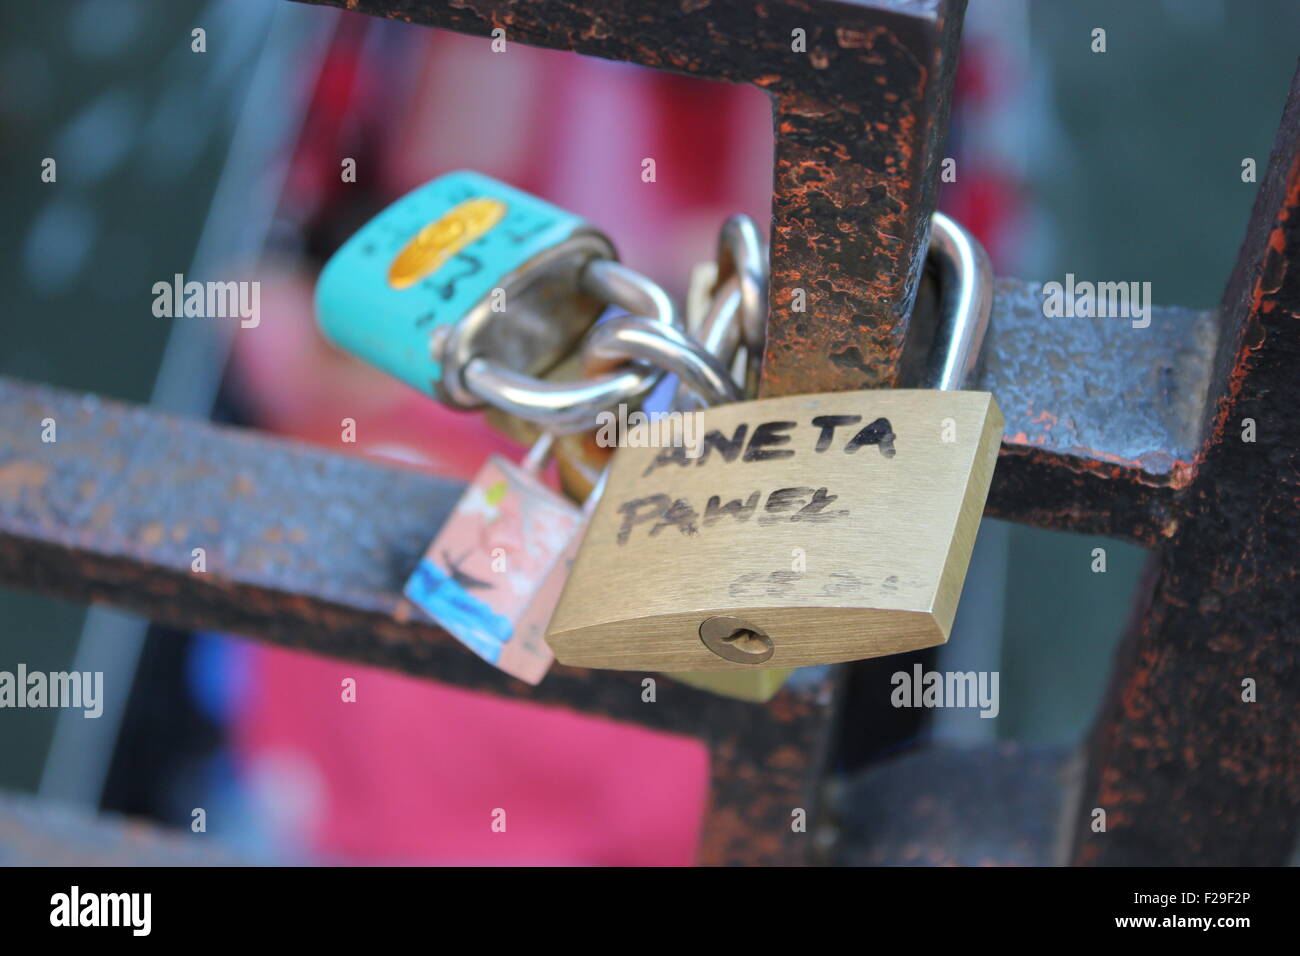 A padlock, with a couple's names on it. Venice Italy Stock Photo